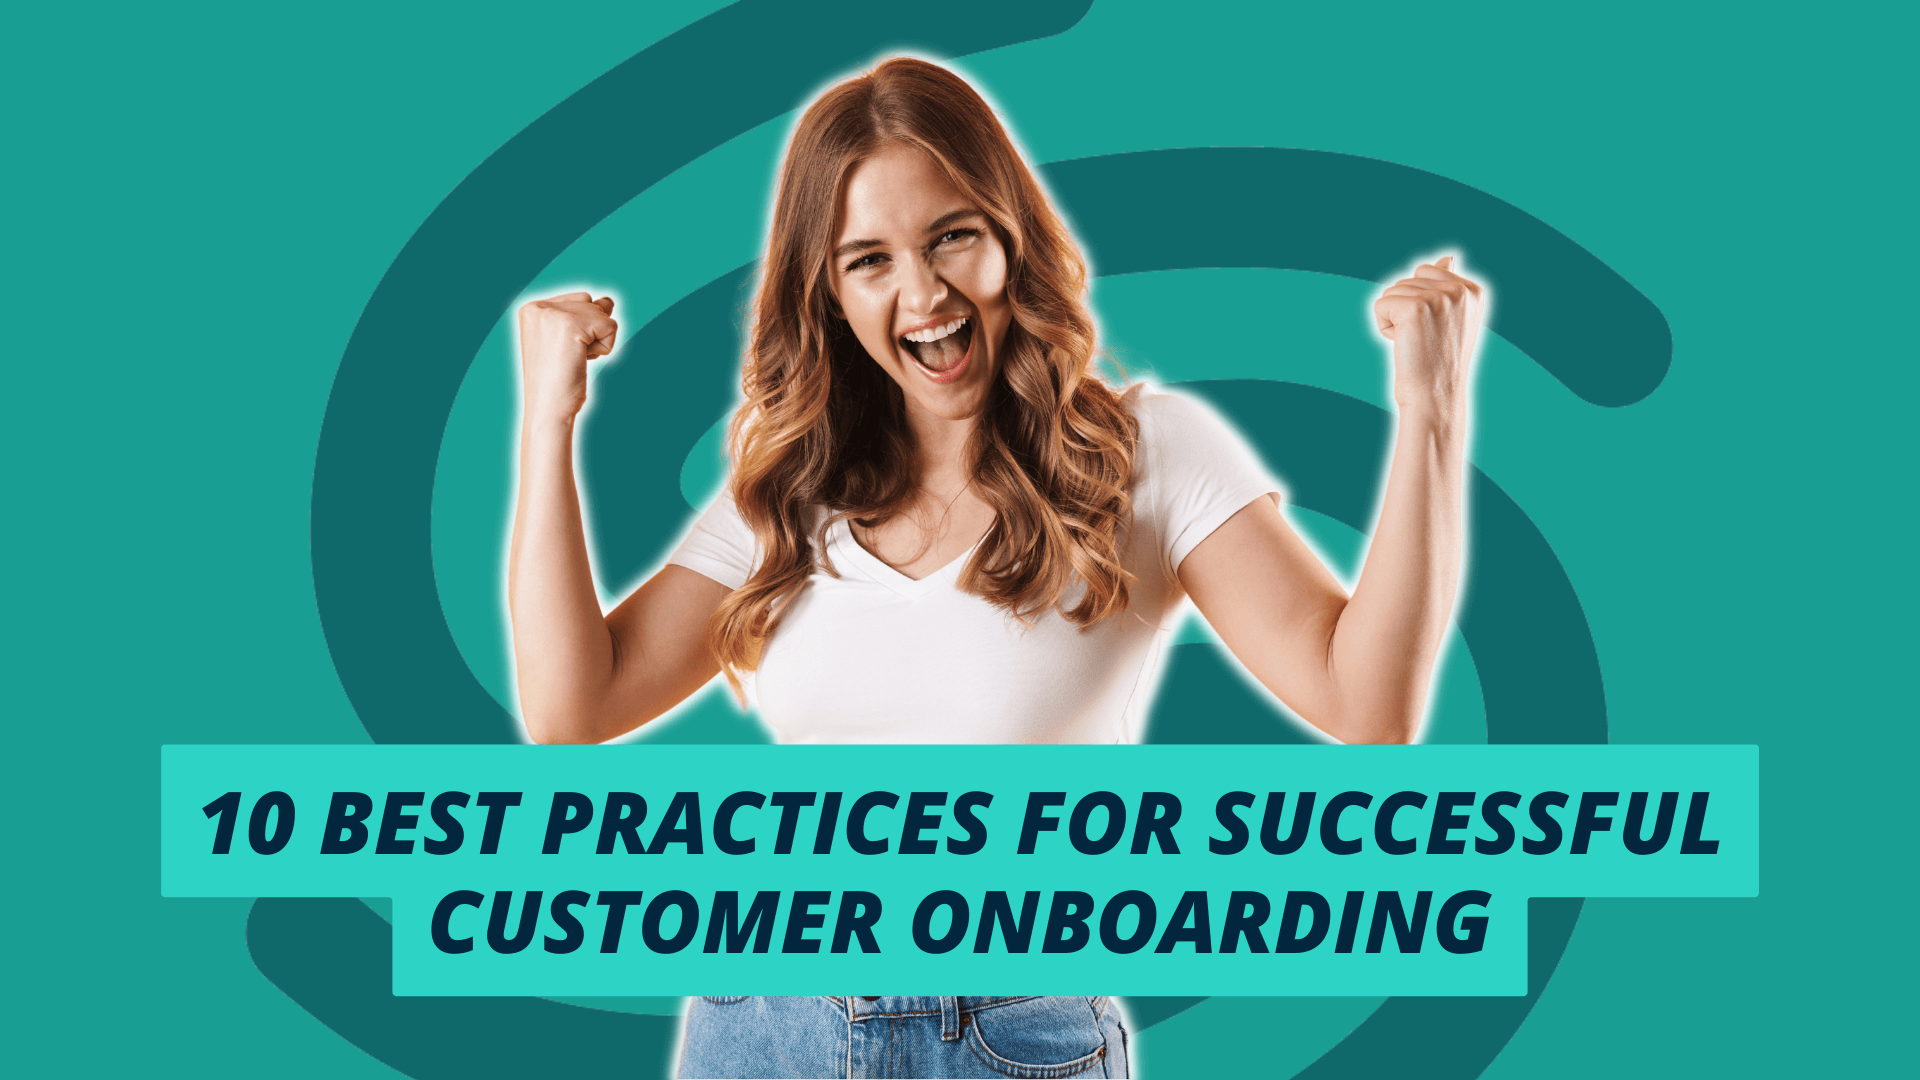 10 best practices for successful customer onboarding